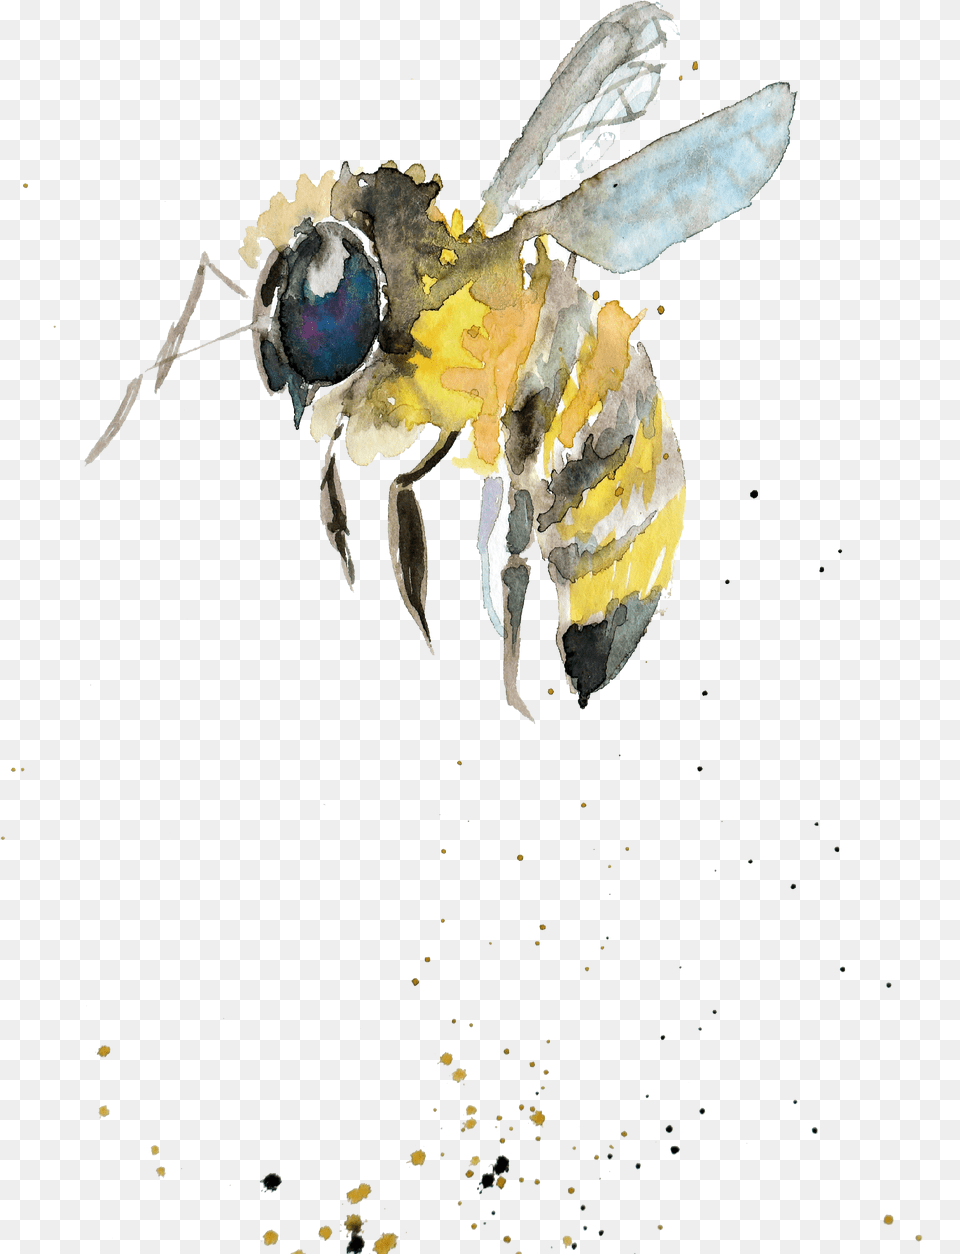 Bumblebee Watercolor Painting Drawing Insect Watercolor Watercolor Bumble Bee, Animal, Invertebrate, Wasp, Apidae Free Transparent Png